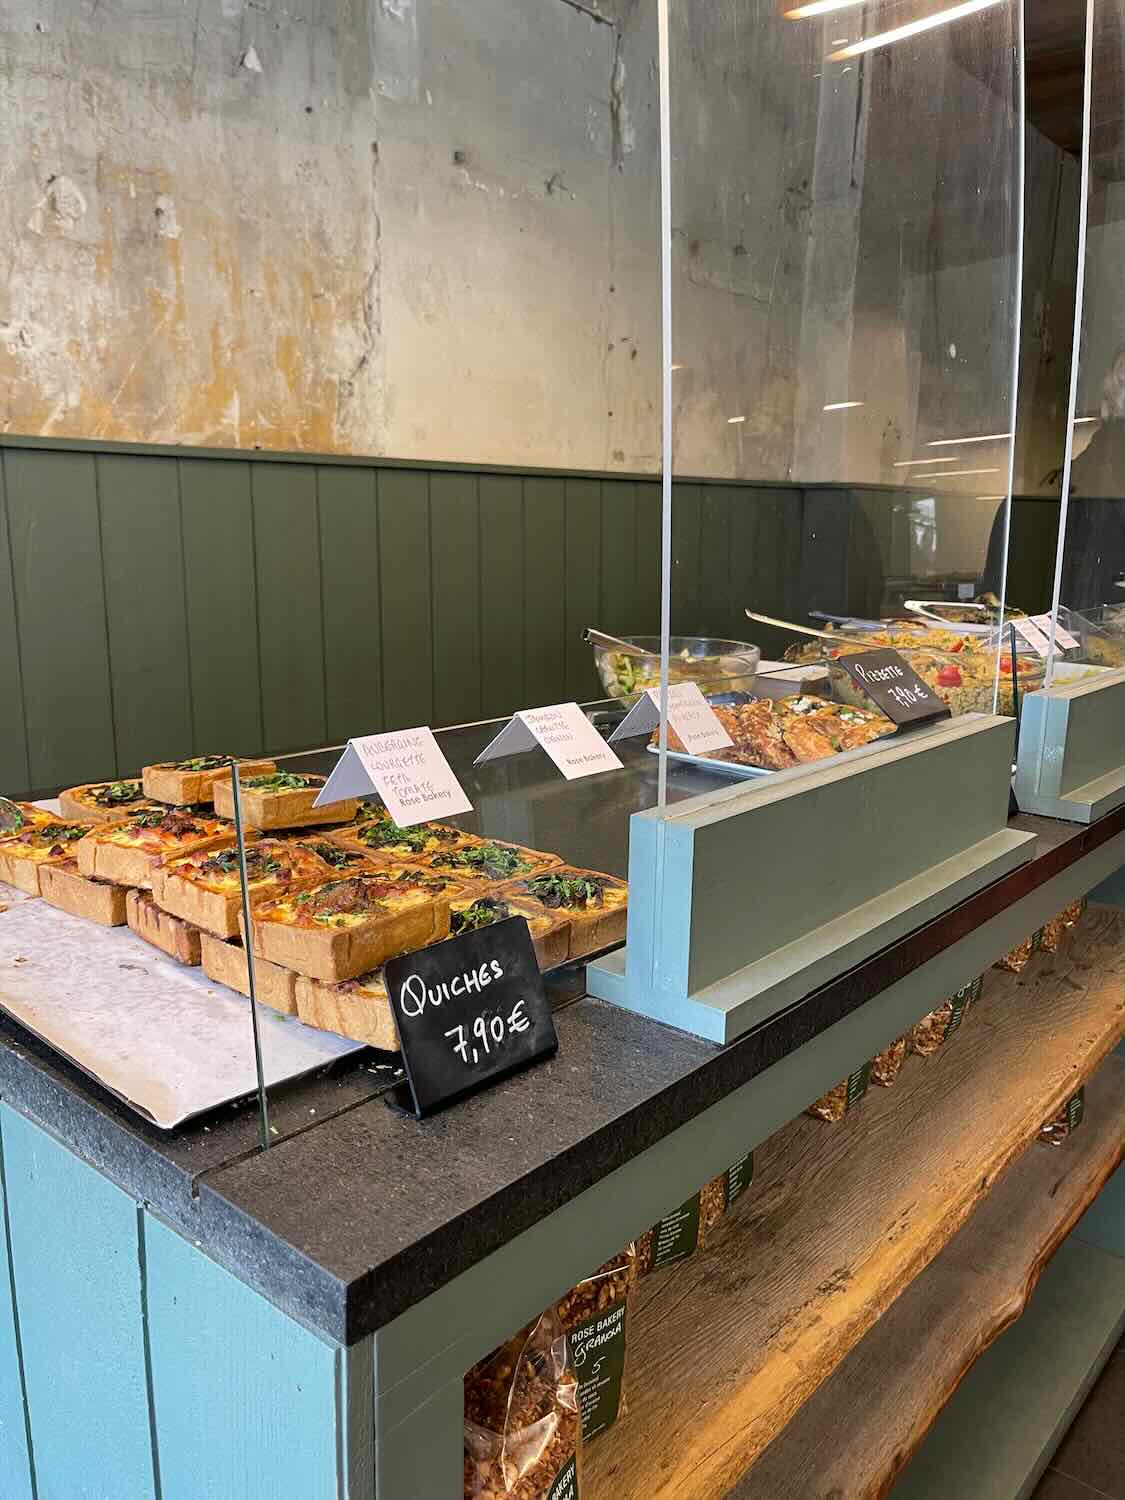 A selection of freshly baked quiches on display at a Parisian bakery, each priced at 7.90€. The counter has a rustic feel with a glass barrier and neatly labeled items.